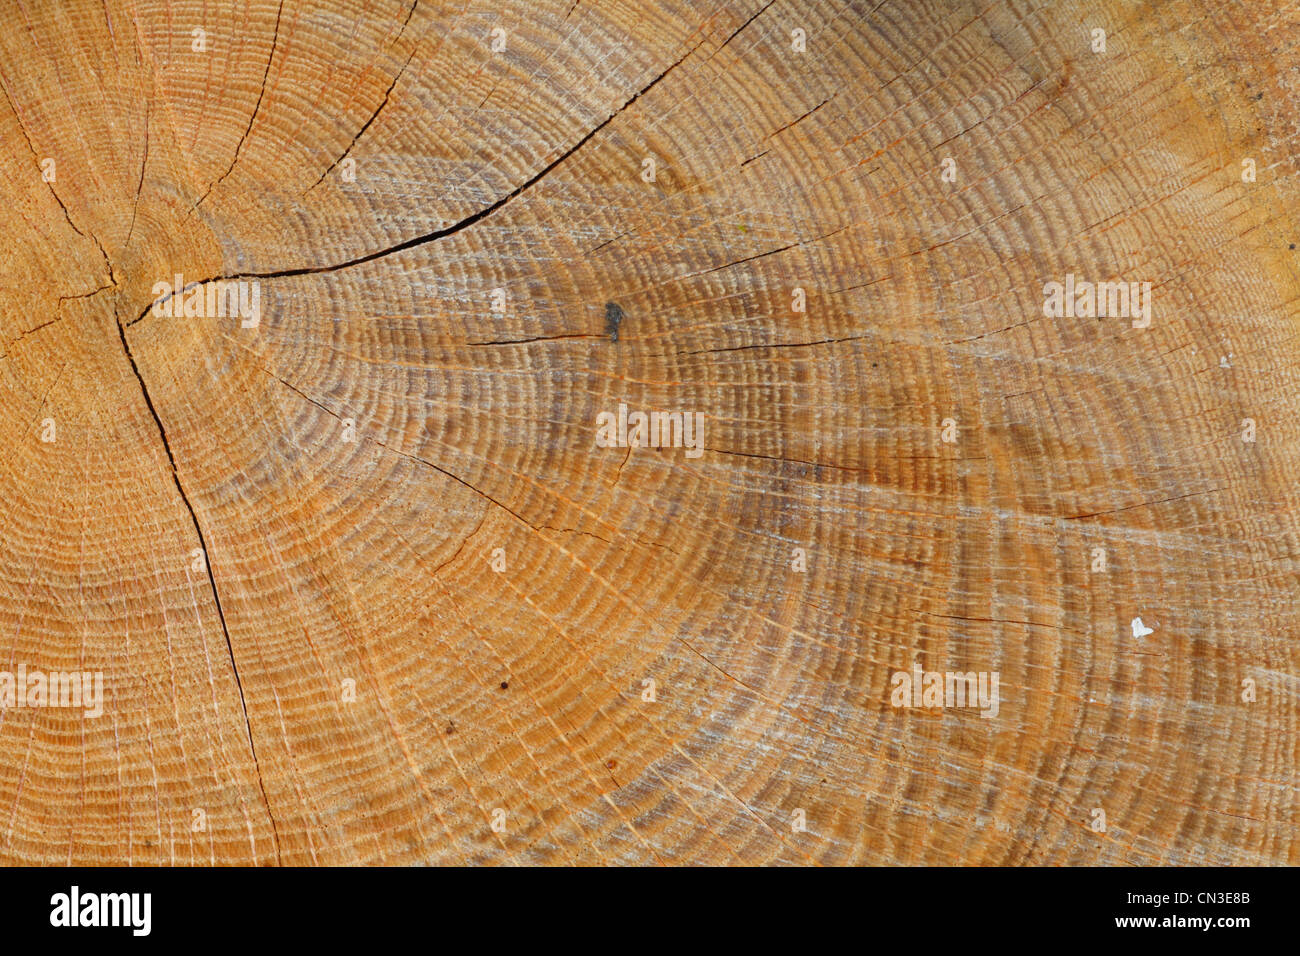 Freshly cut stump of a Sessile Oak (Quercus petraea) tree, showing growth rings. Powys, Wales, April. Stock Photo